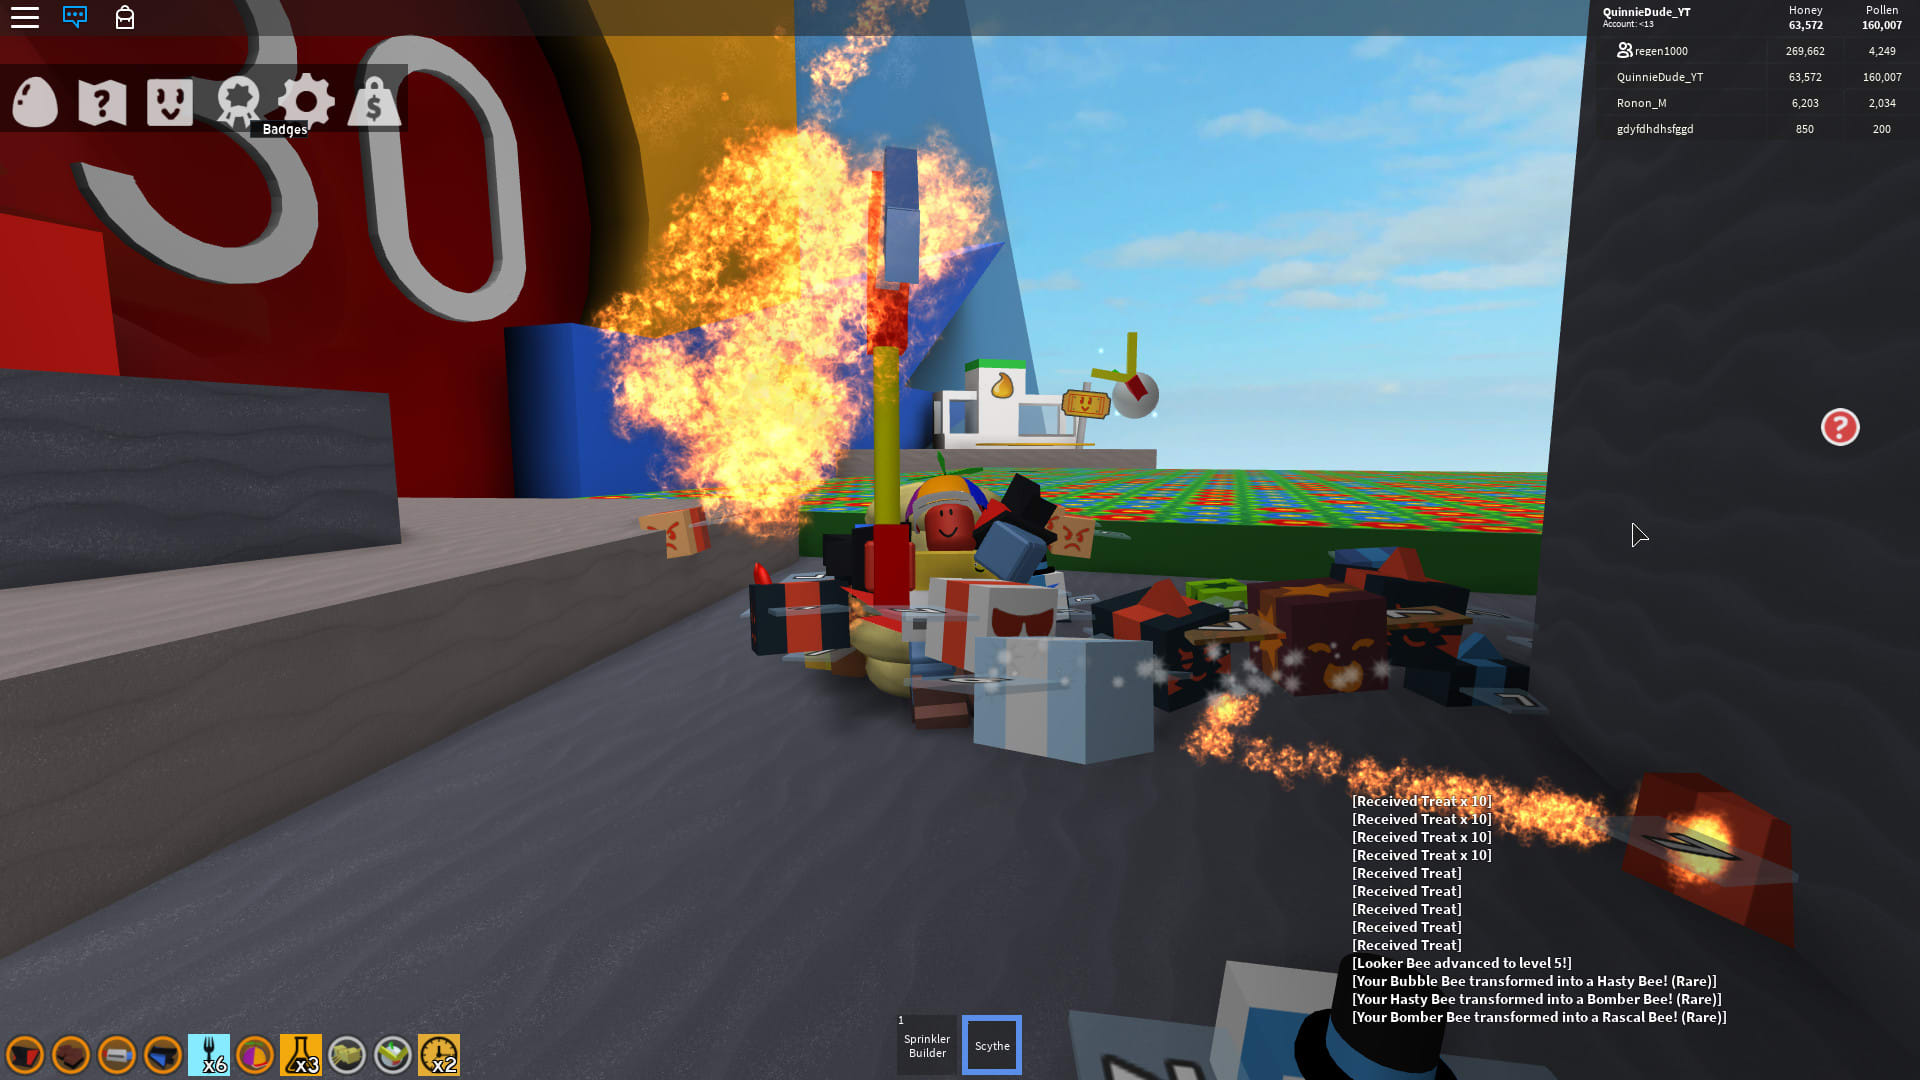 Play Roblox With You By Quinniedude Yt